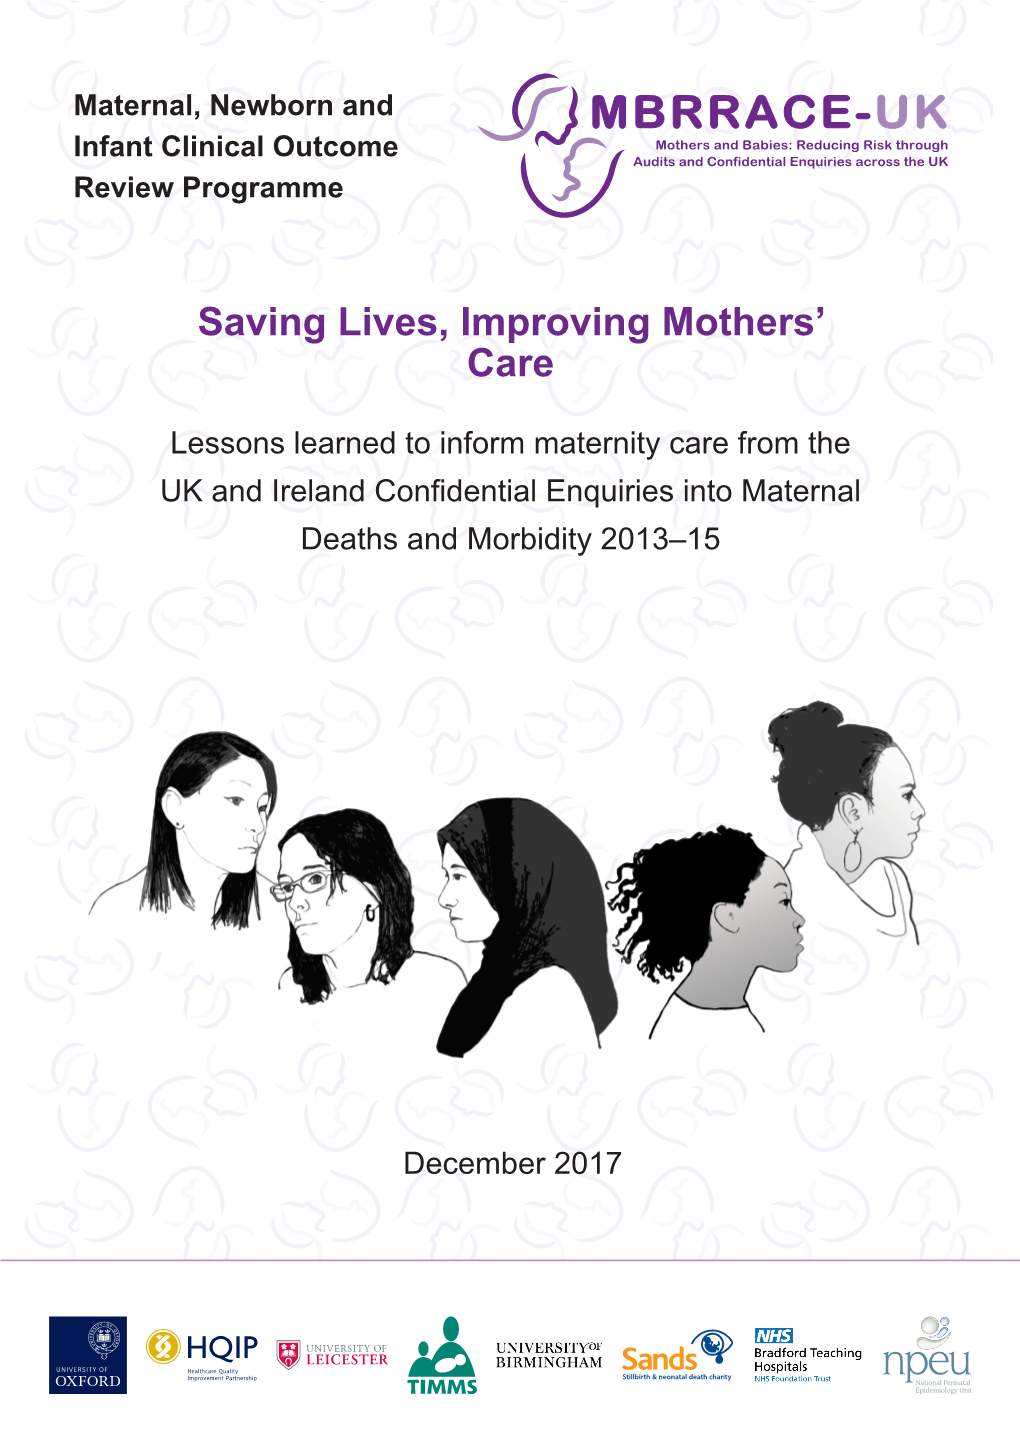 Saving Lives, Improving Mothers' Care